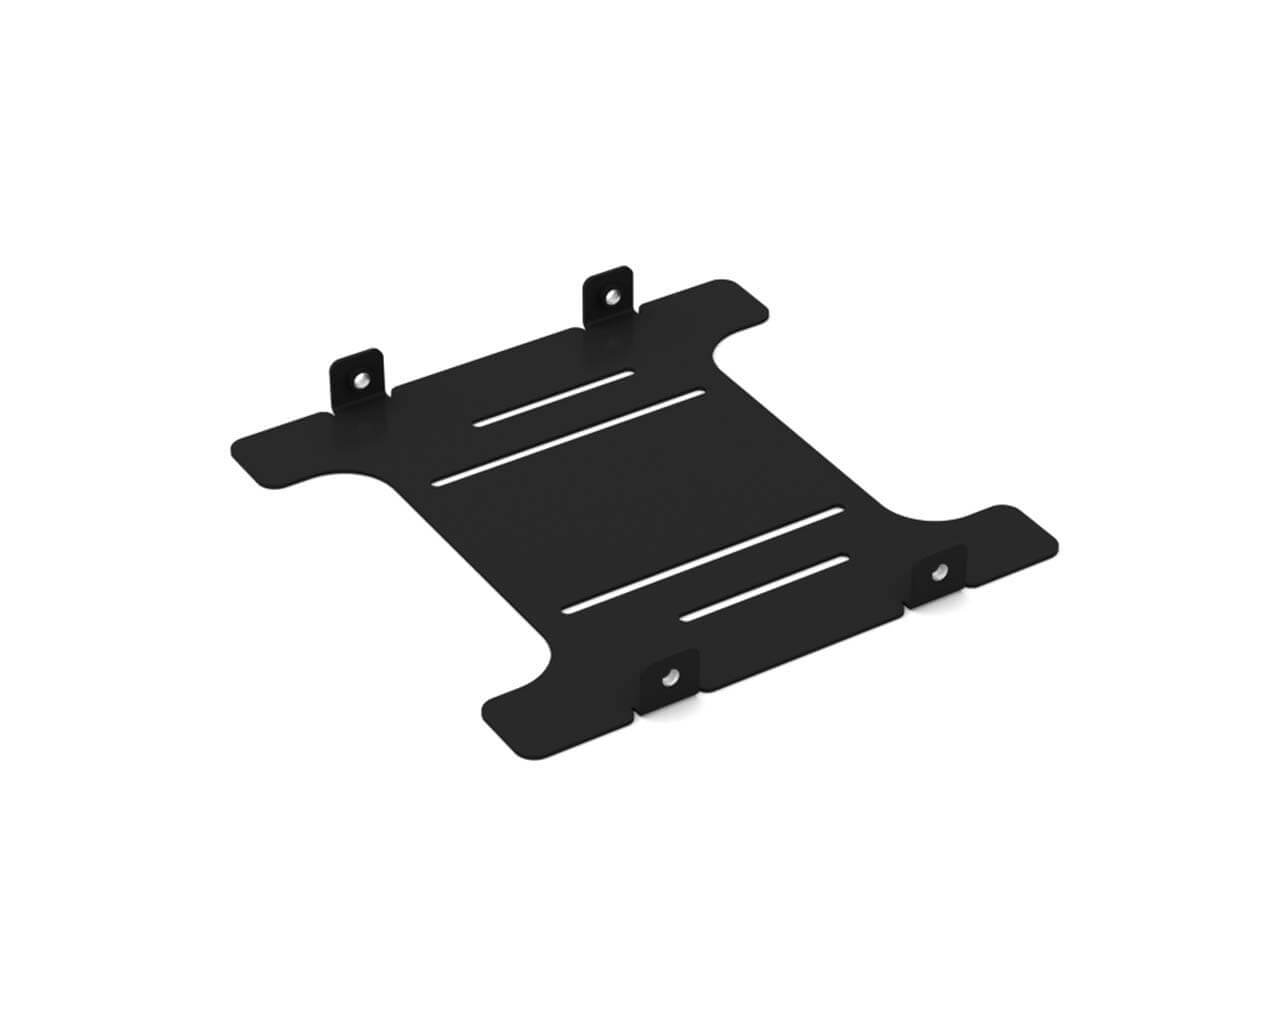 Praxis WetBenchSX 5.25 Bay HDD/SSD Adapter Bracket - PrimoChill - KEEPING IT COOL Black